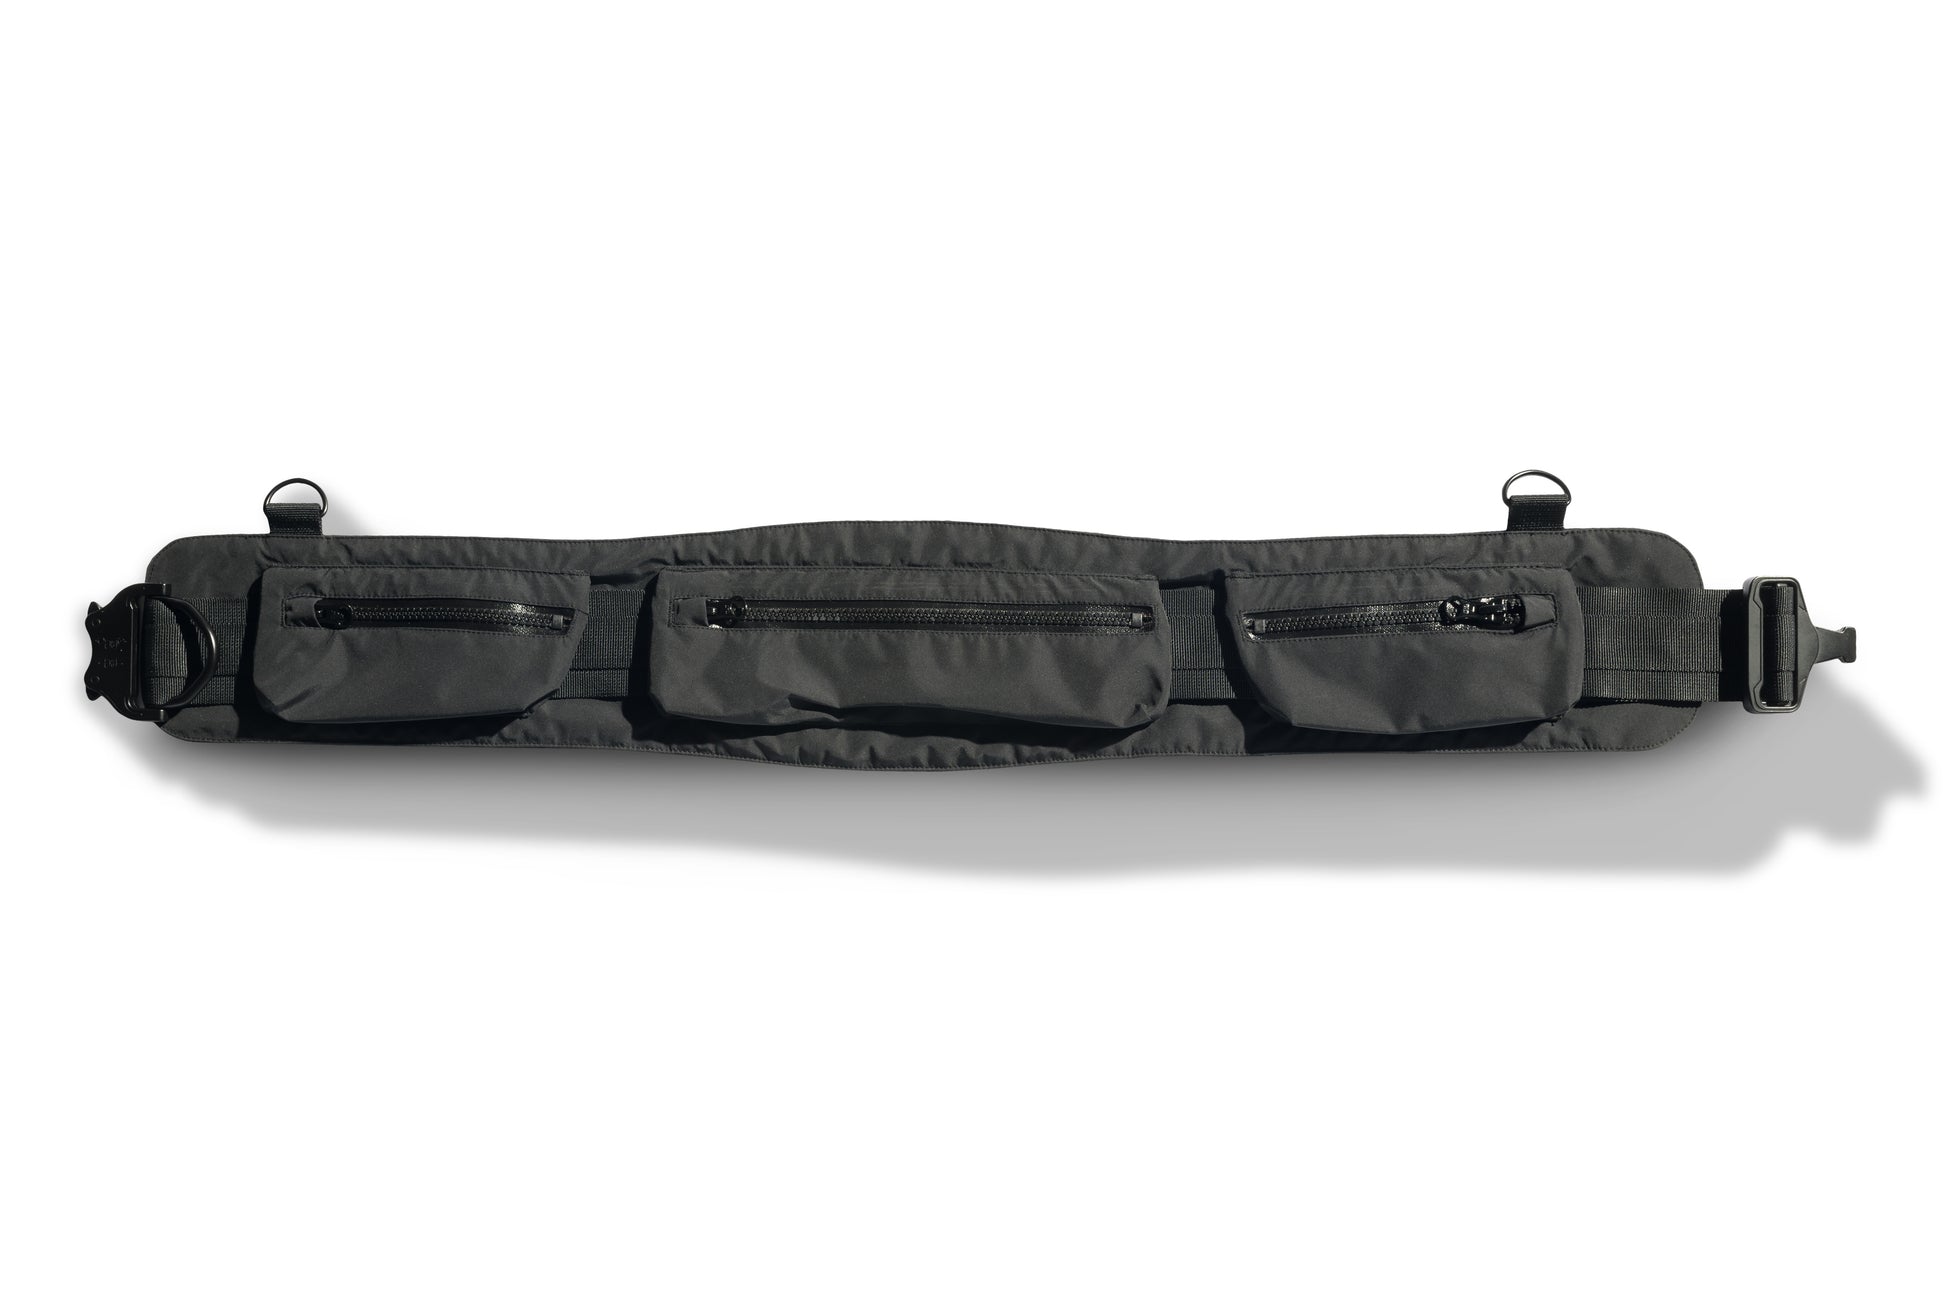 Cylar Unisex Tactical Modular Belt in 3-ply micro denier fabrication with DWR coating, cobra buckle closure with webbing straps, and three pockets with waterproof zippers, in Black